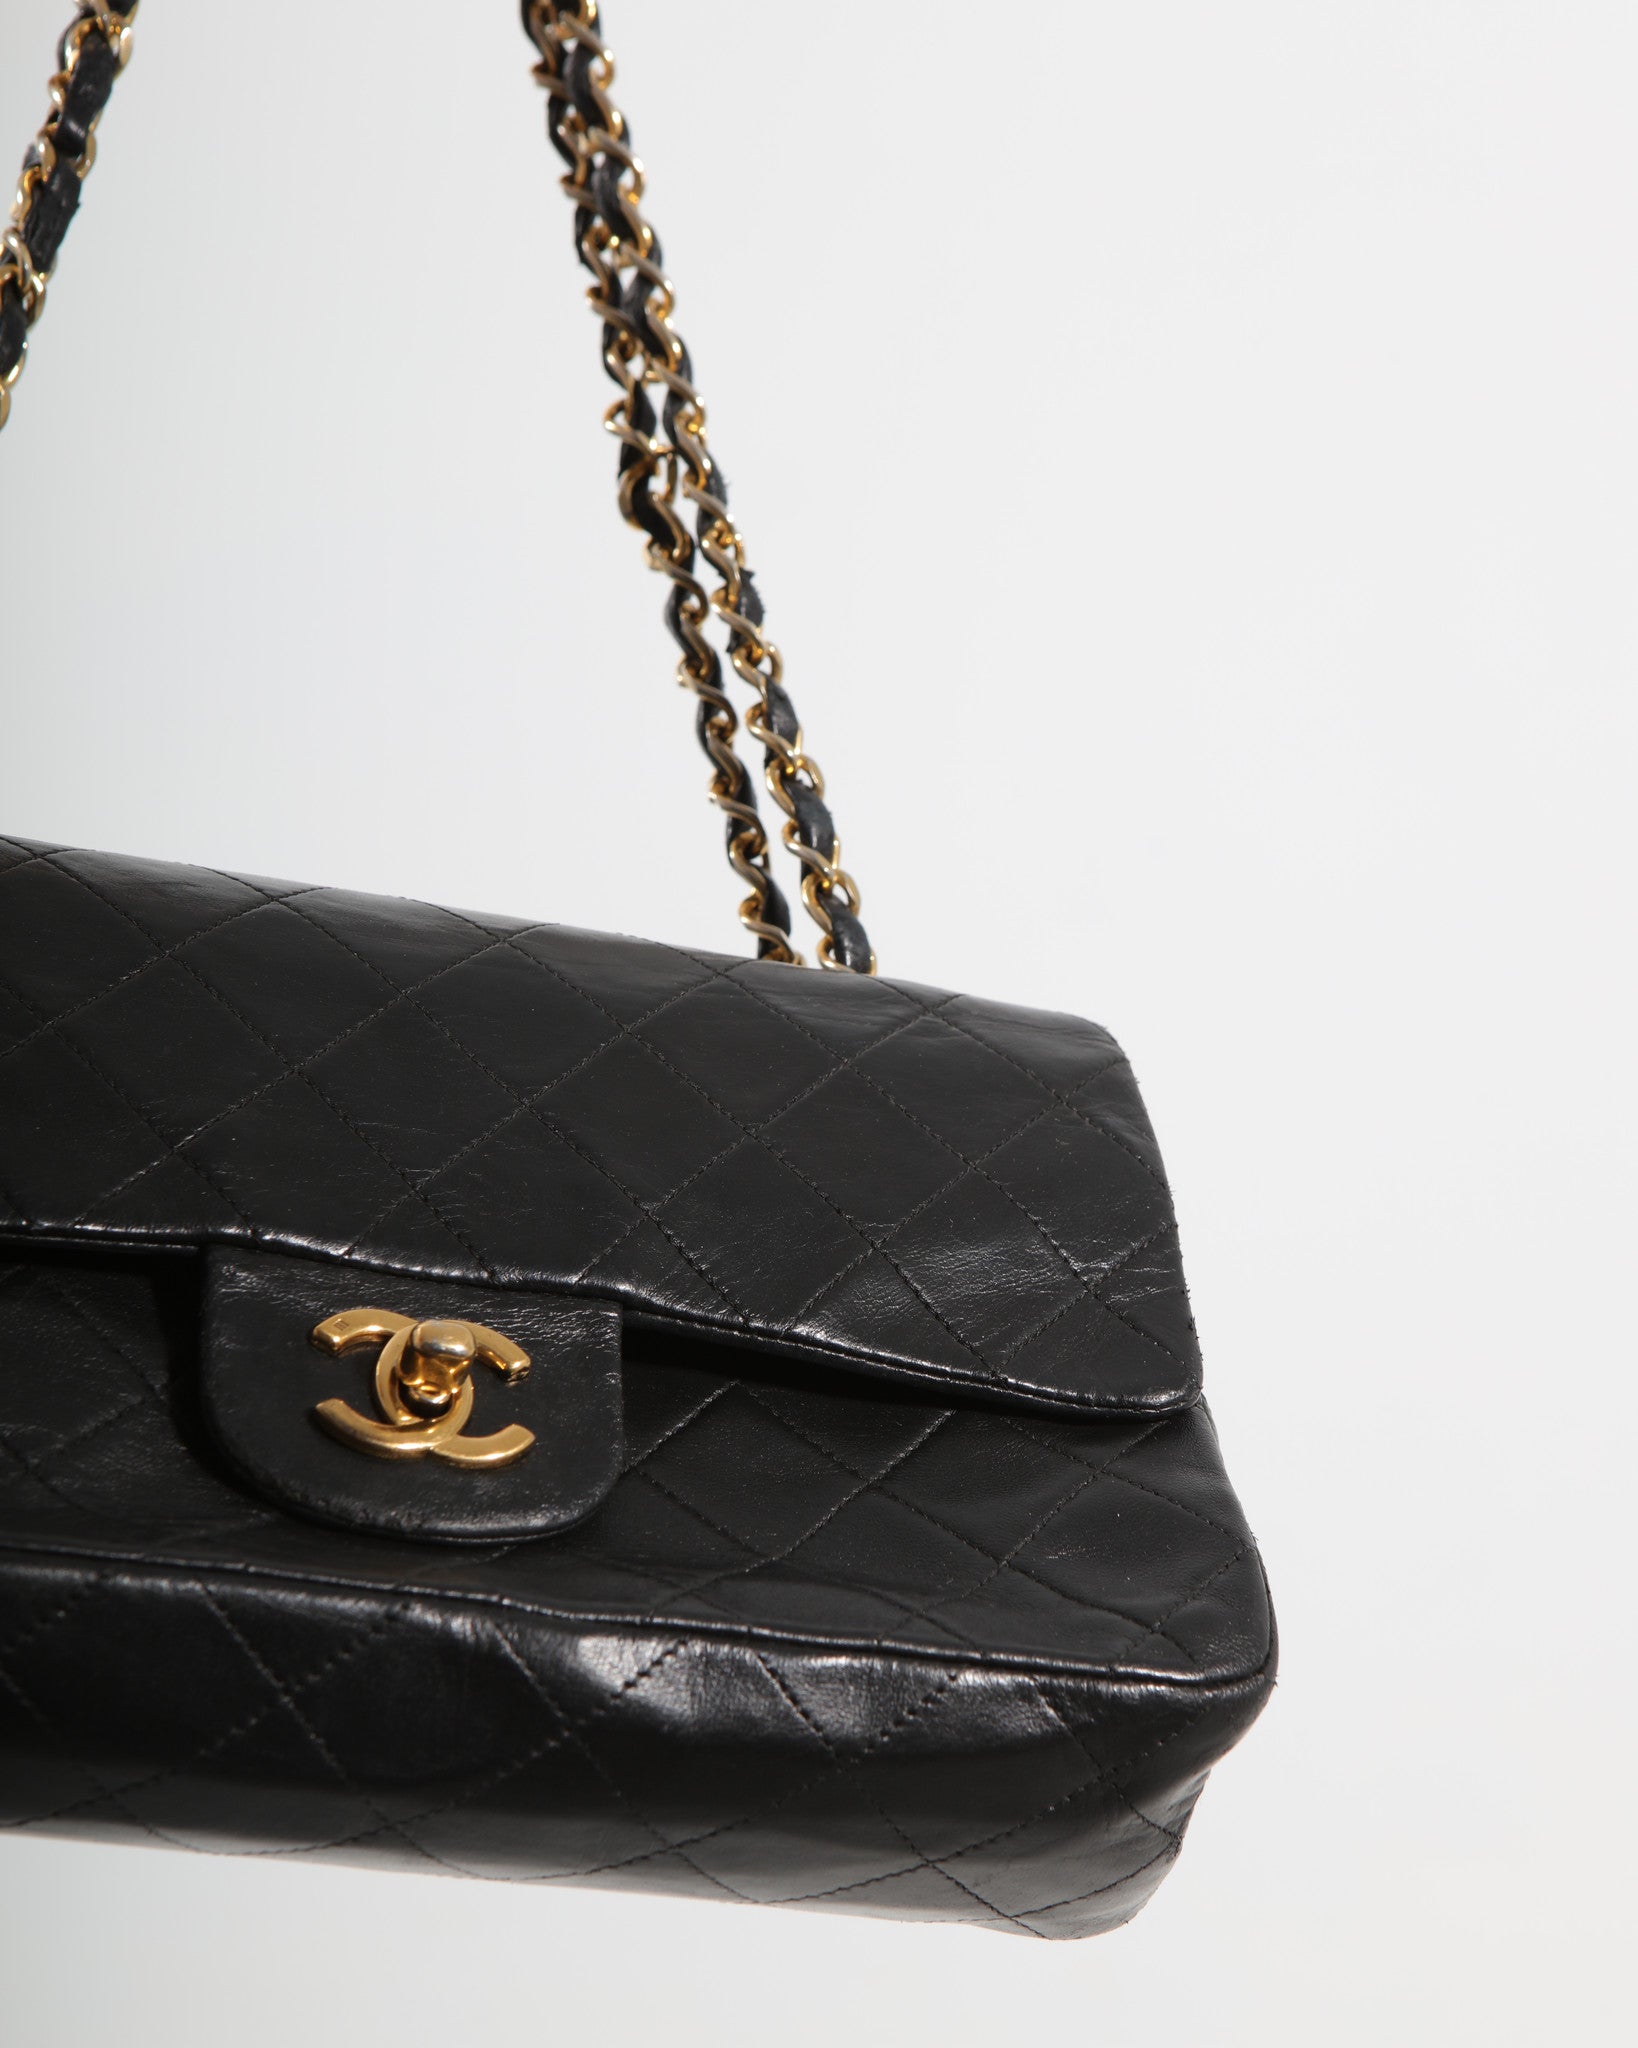 Chanel Vintage Black Lambskin Small Classic Double Flap Bag GHW